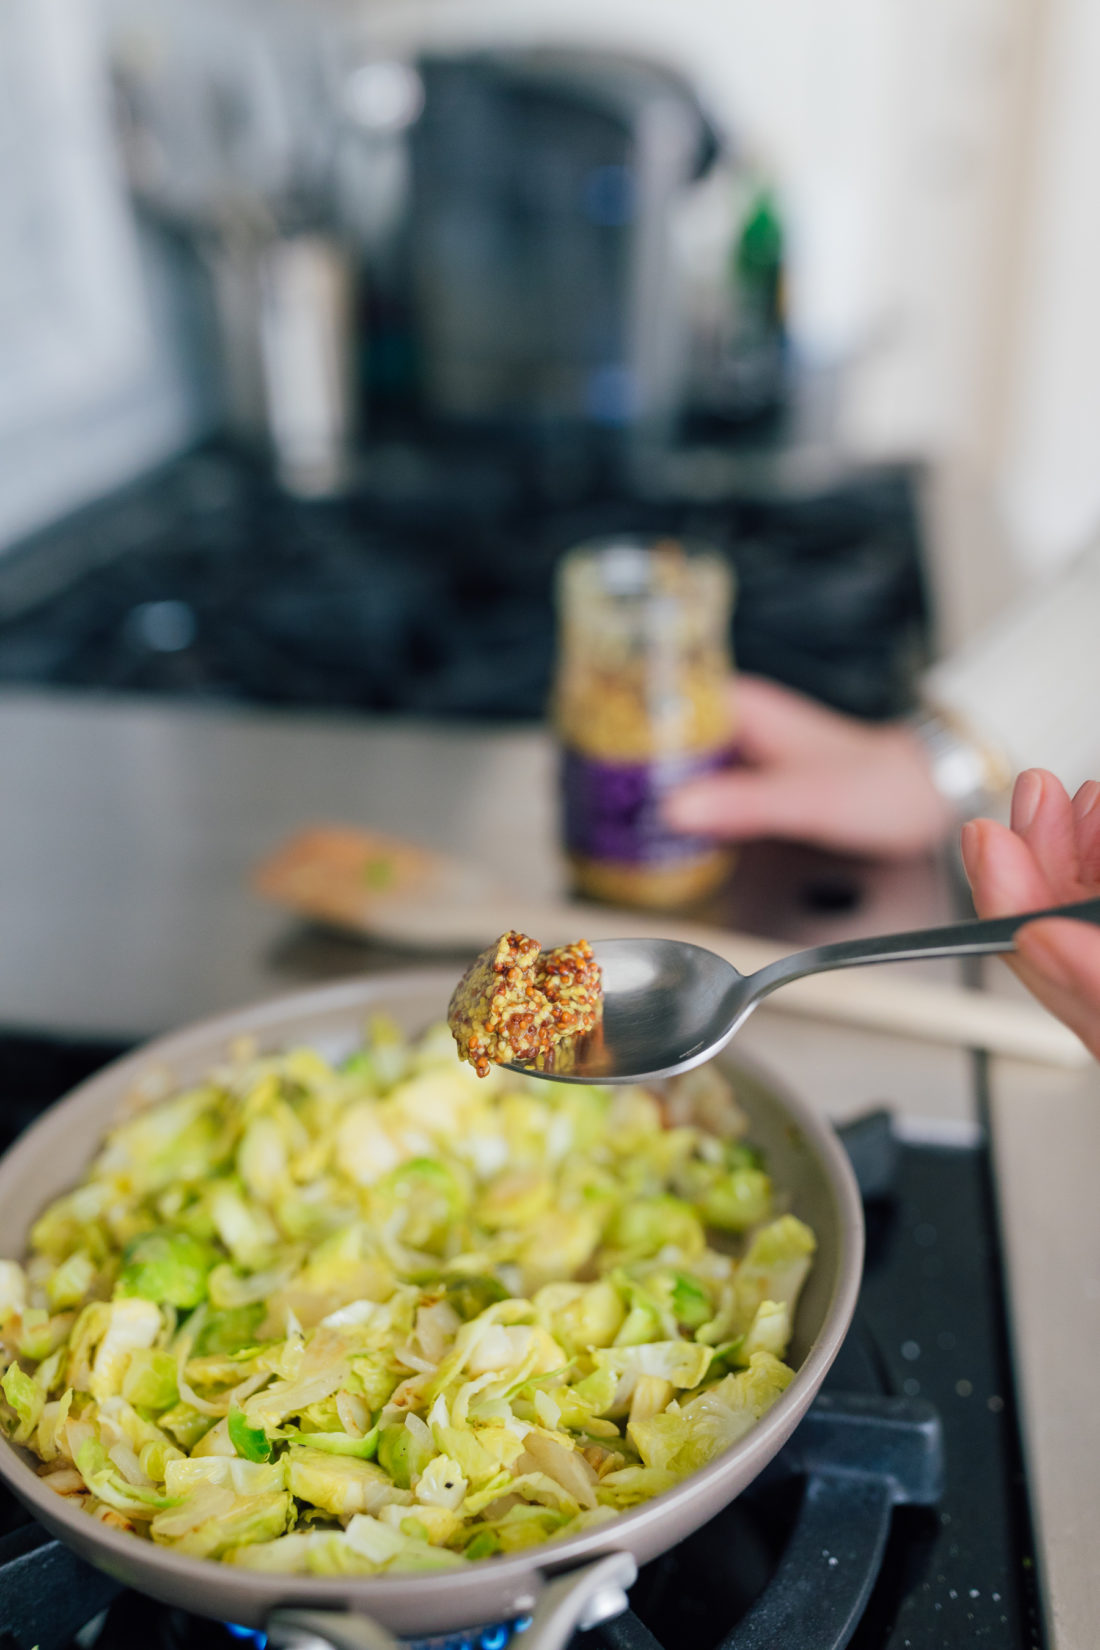 Eva Amurri Martino measures out grainy mustard for her Brussels Sprouts side dish